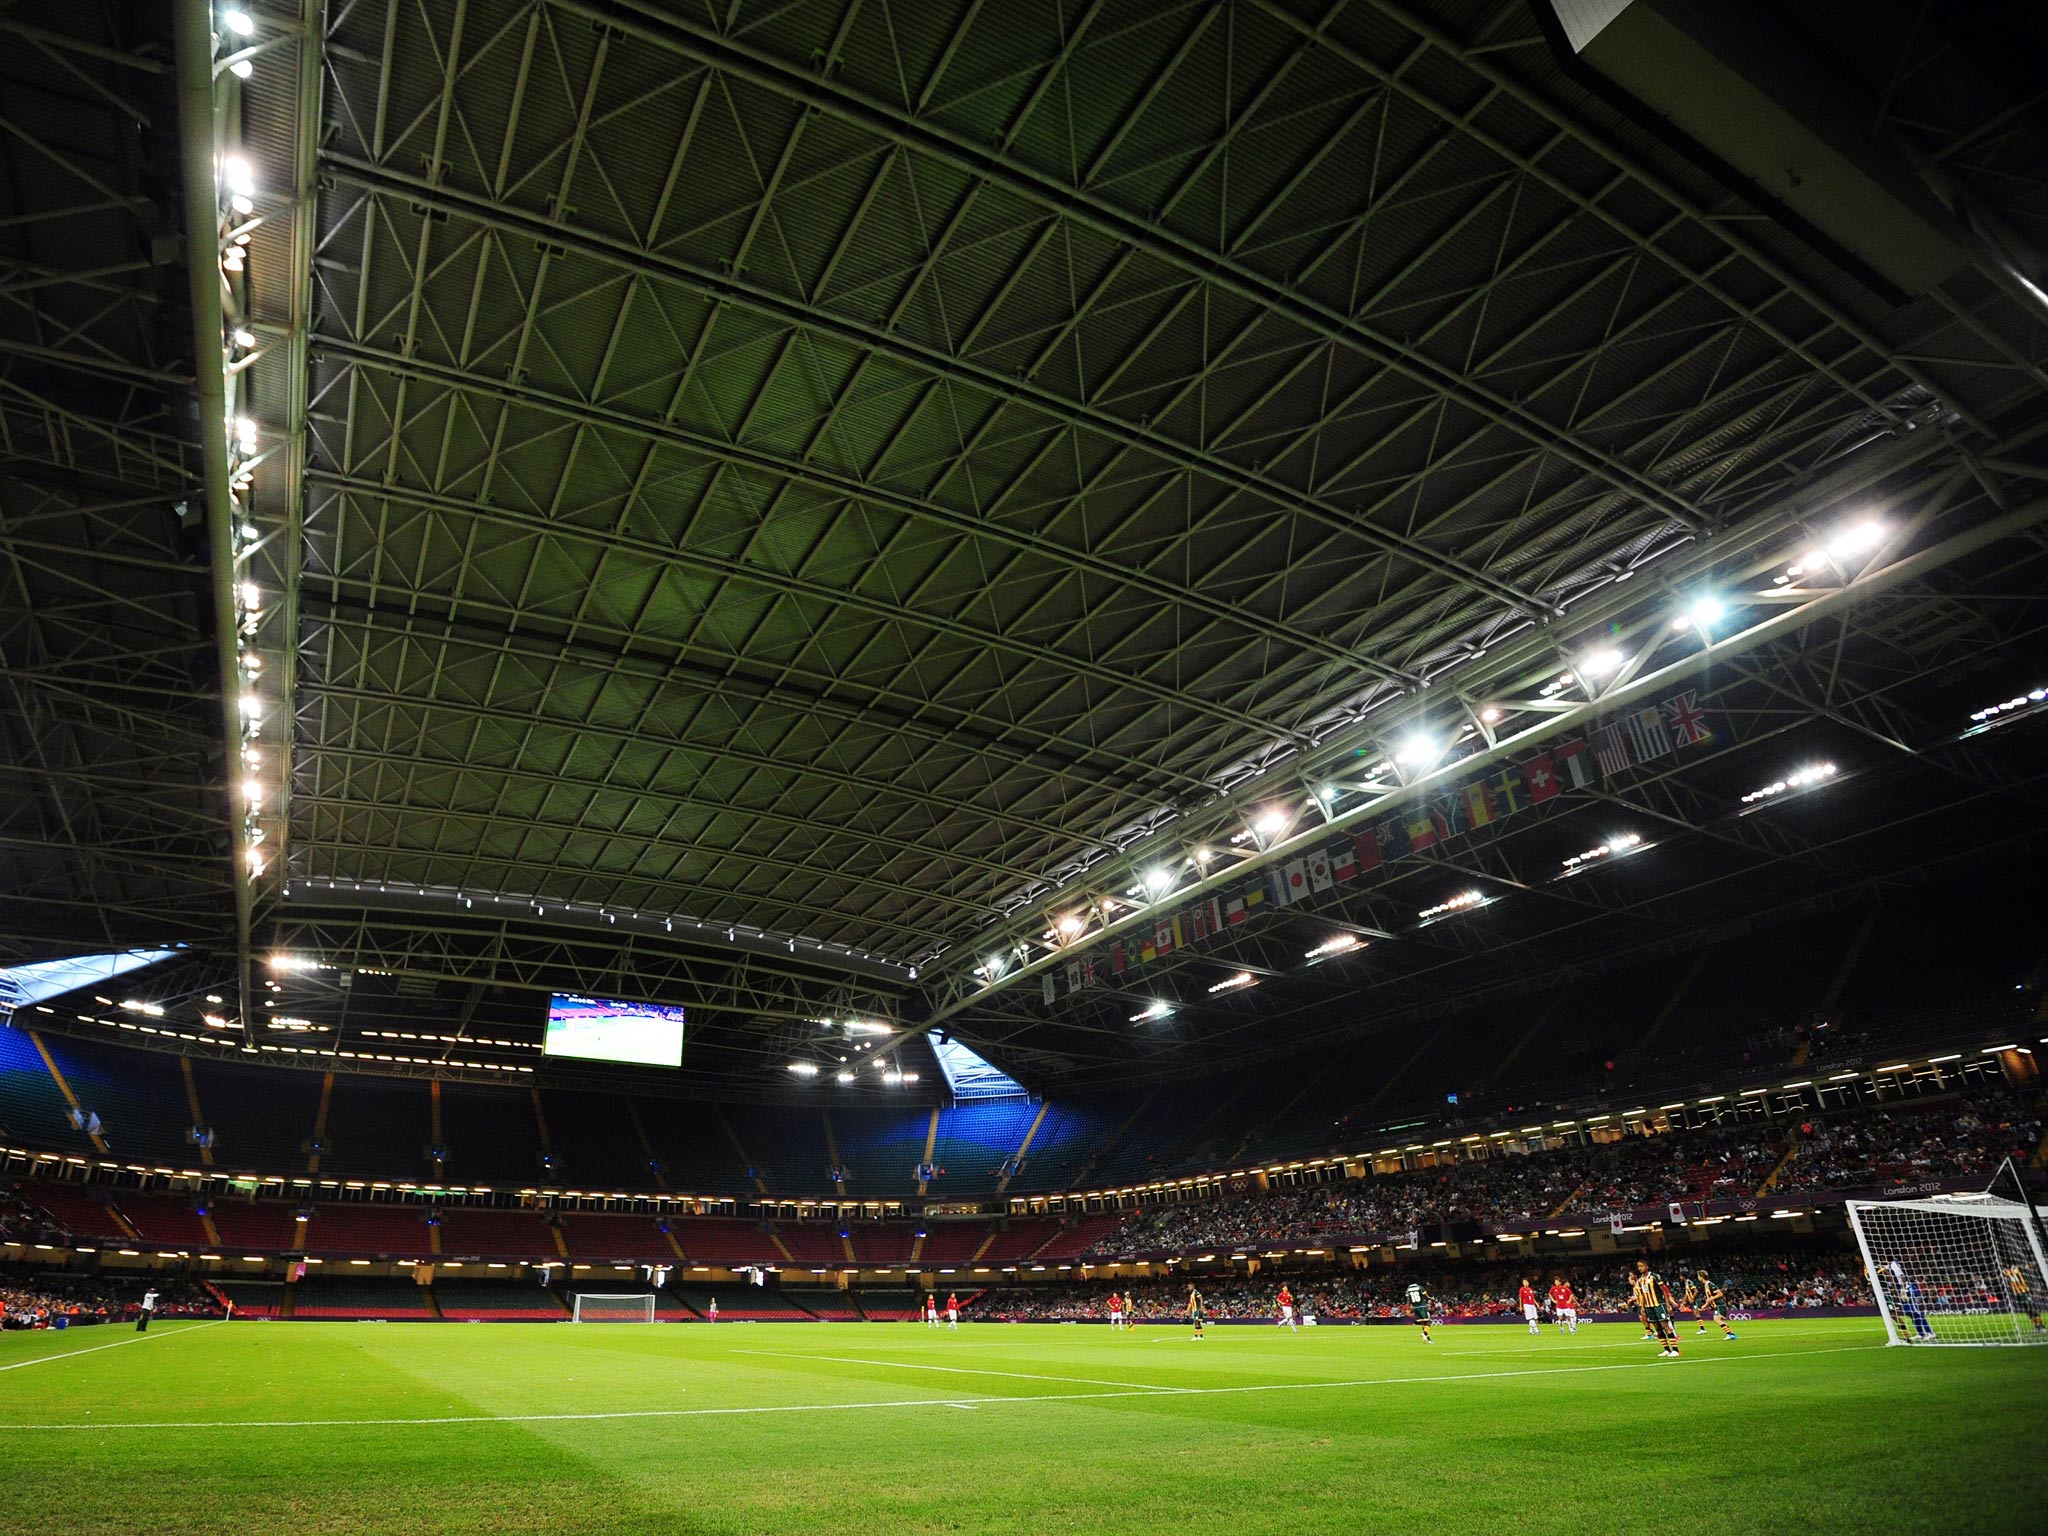 A view of the Millennium Stadium roof